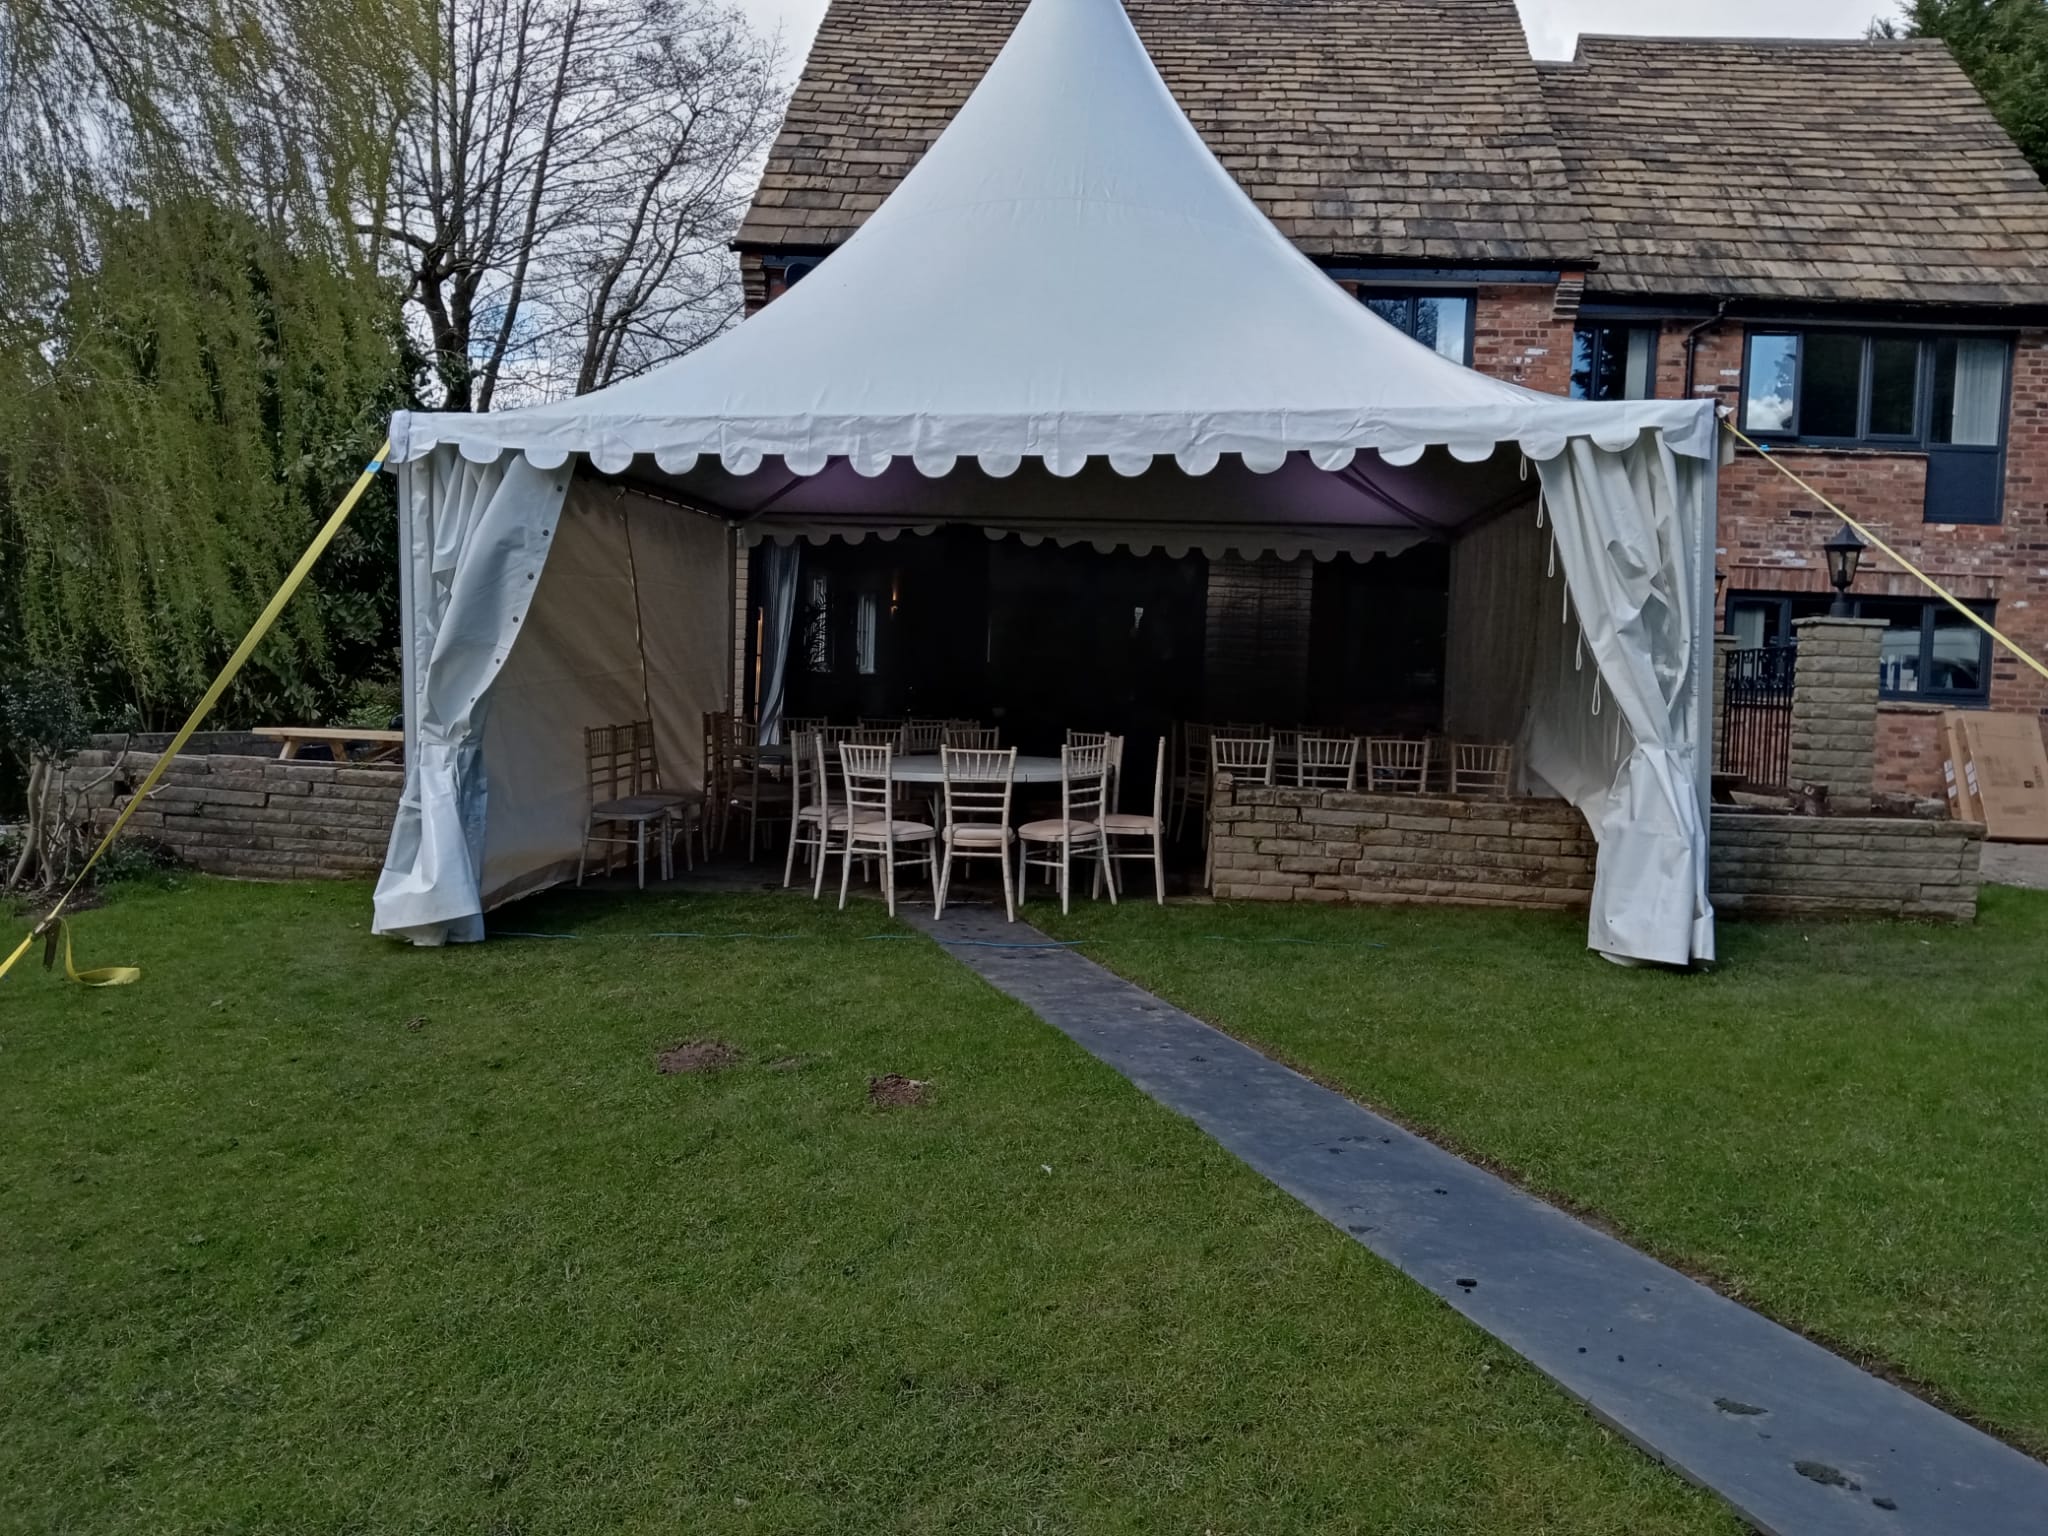 Main image for Pagoda Marquee Hire